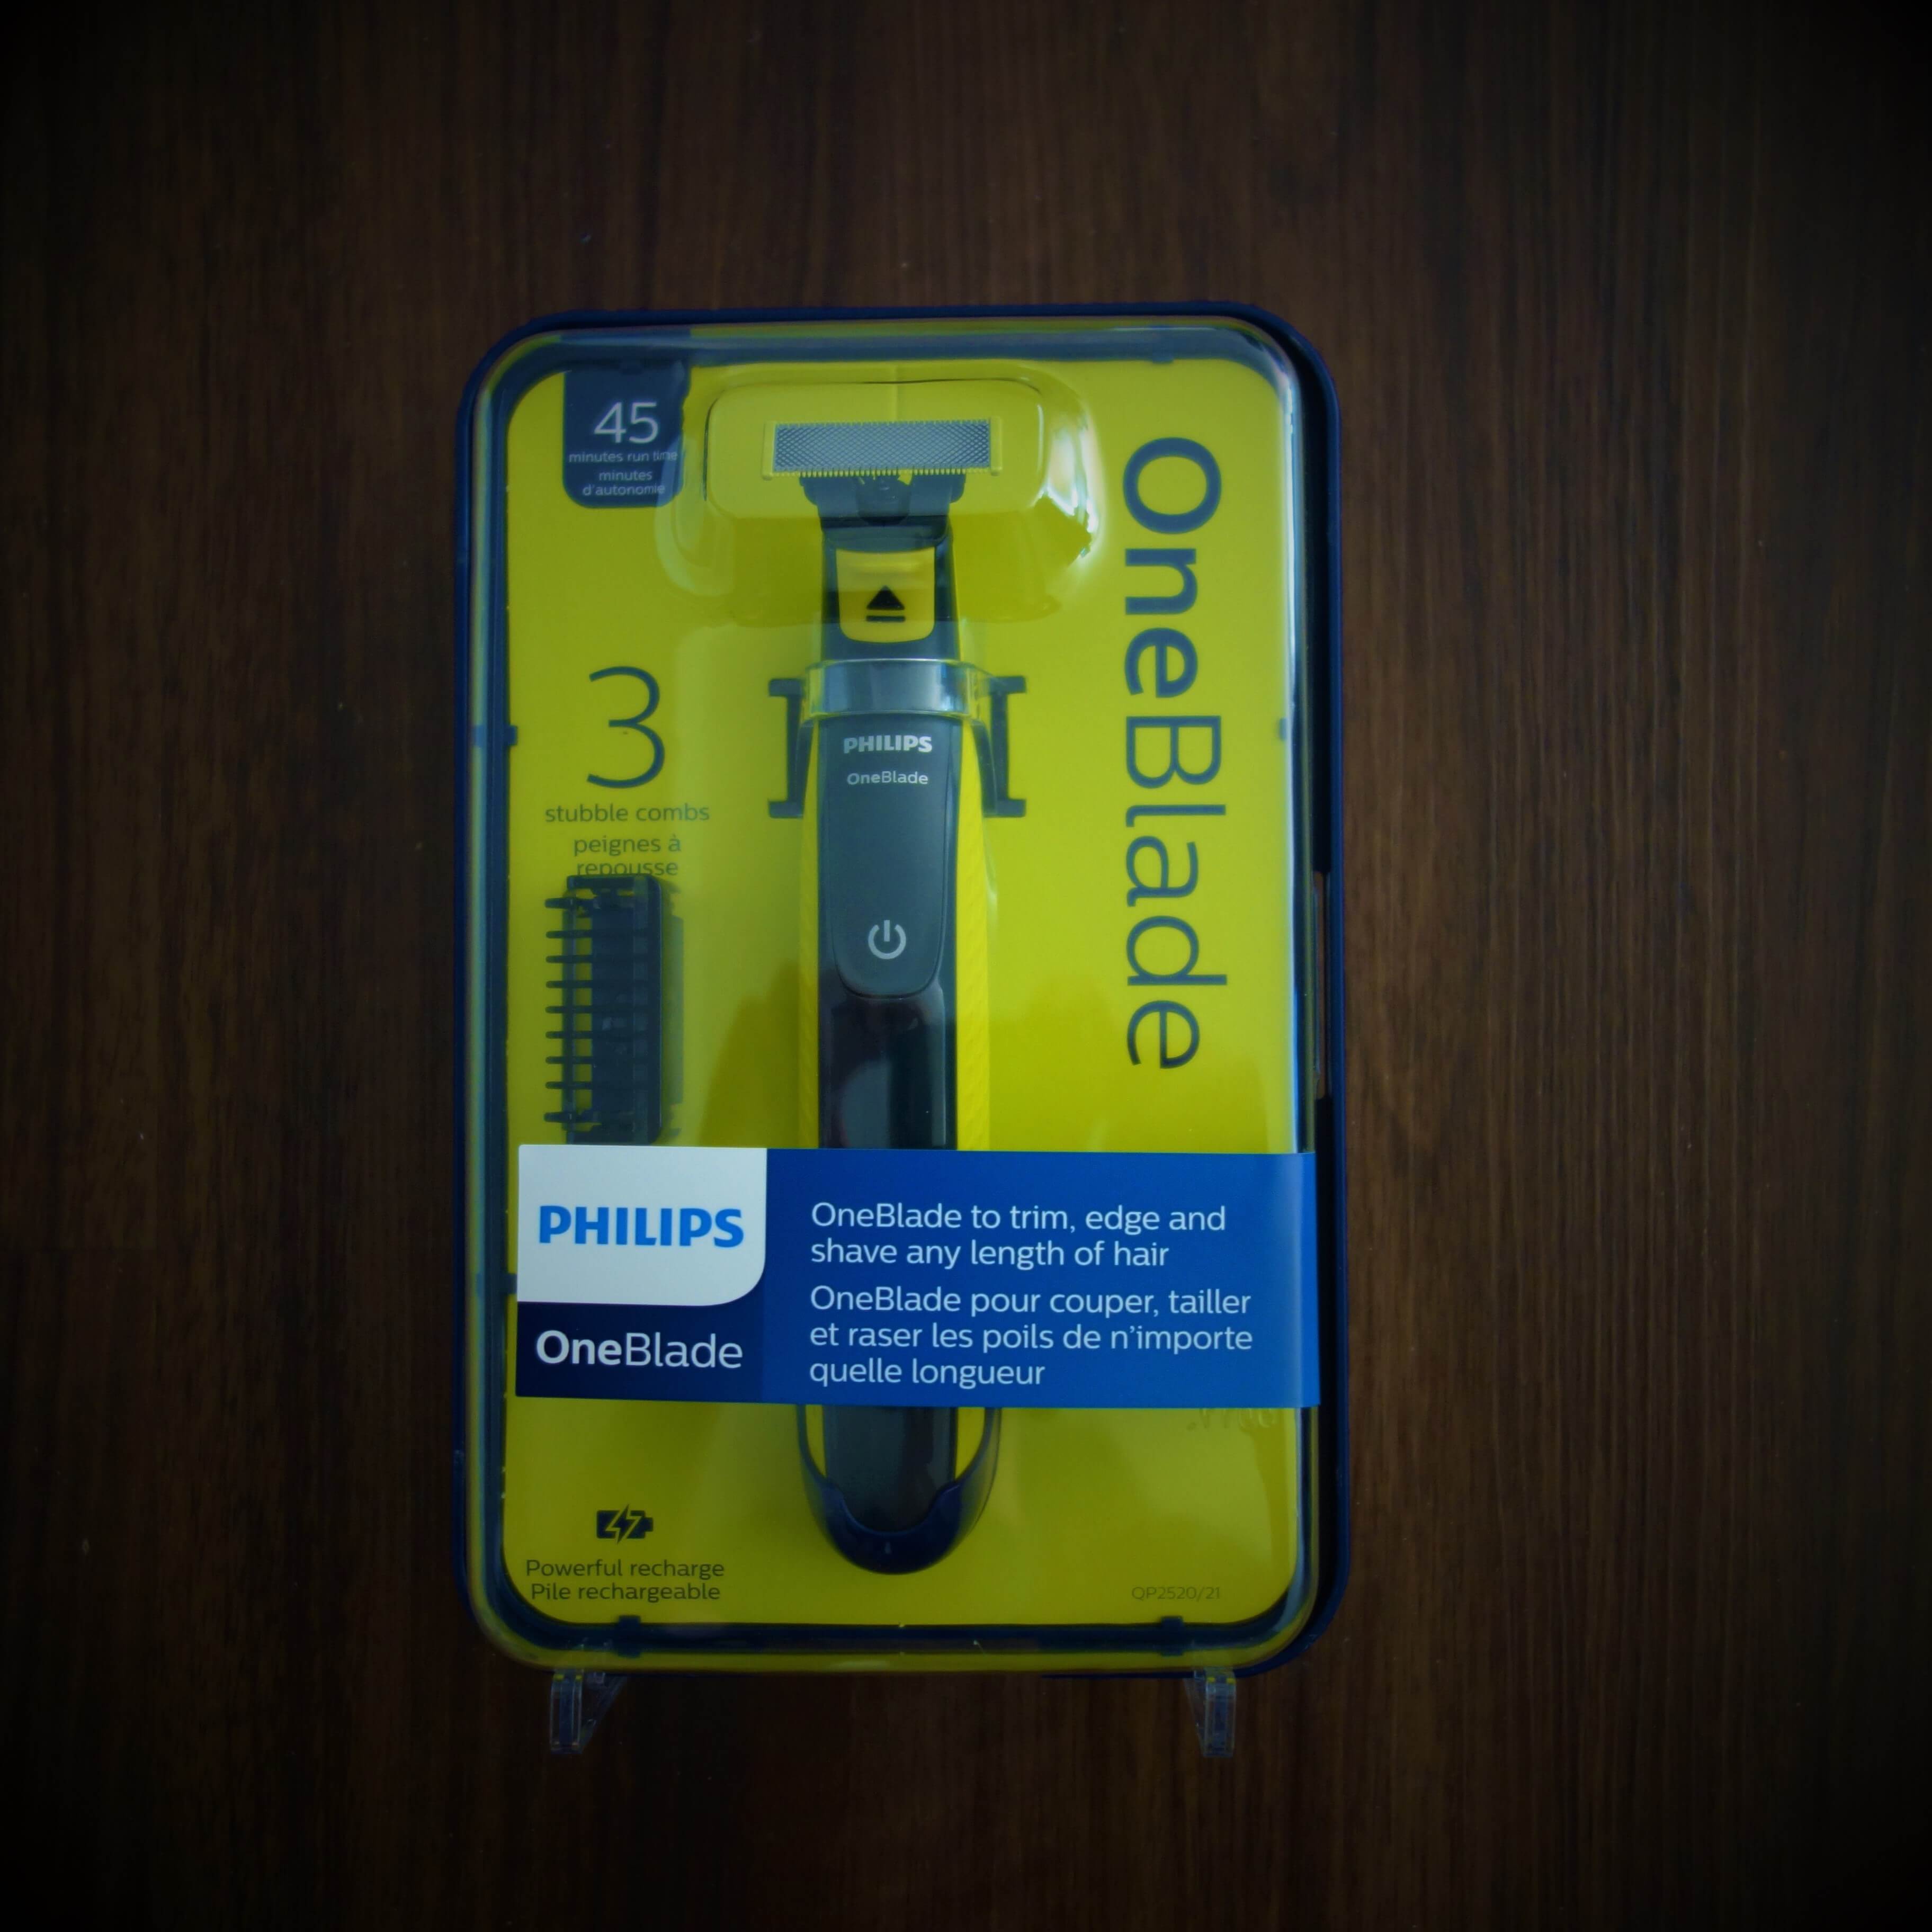 philips oneblade review